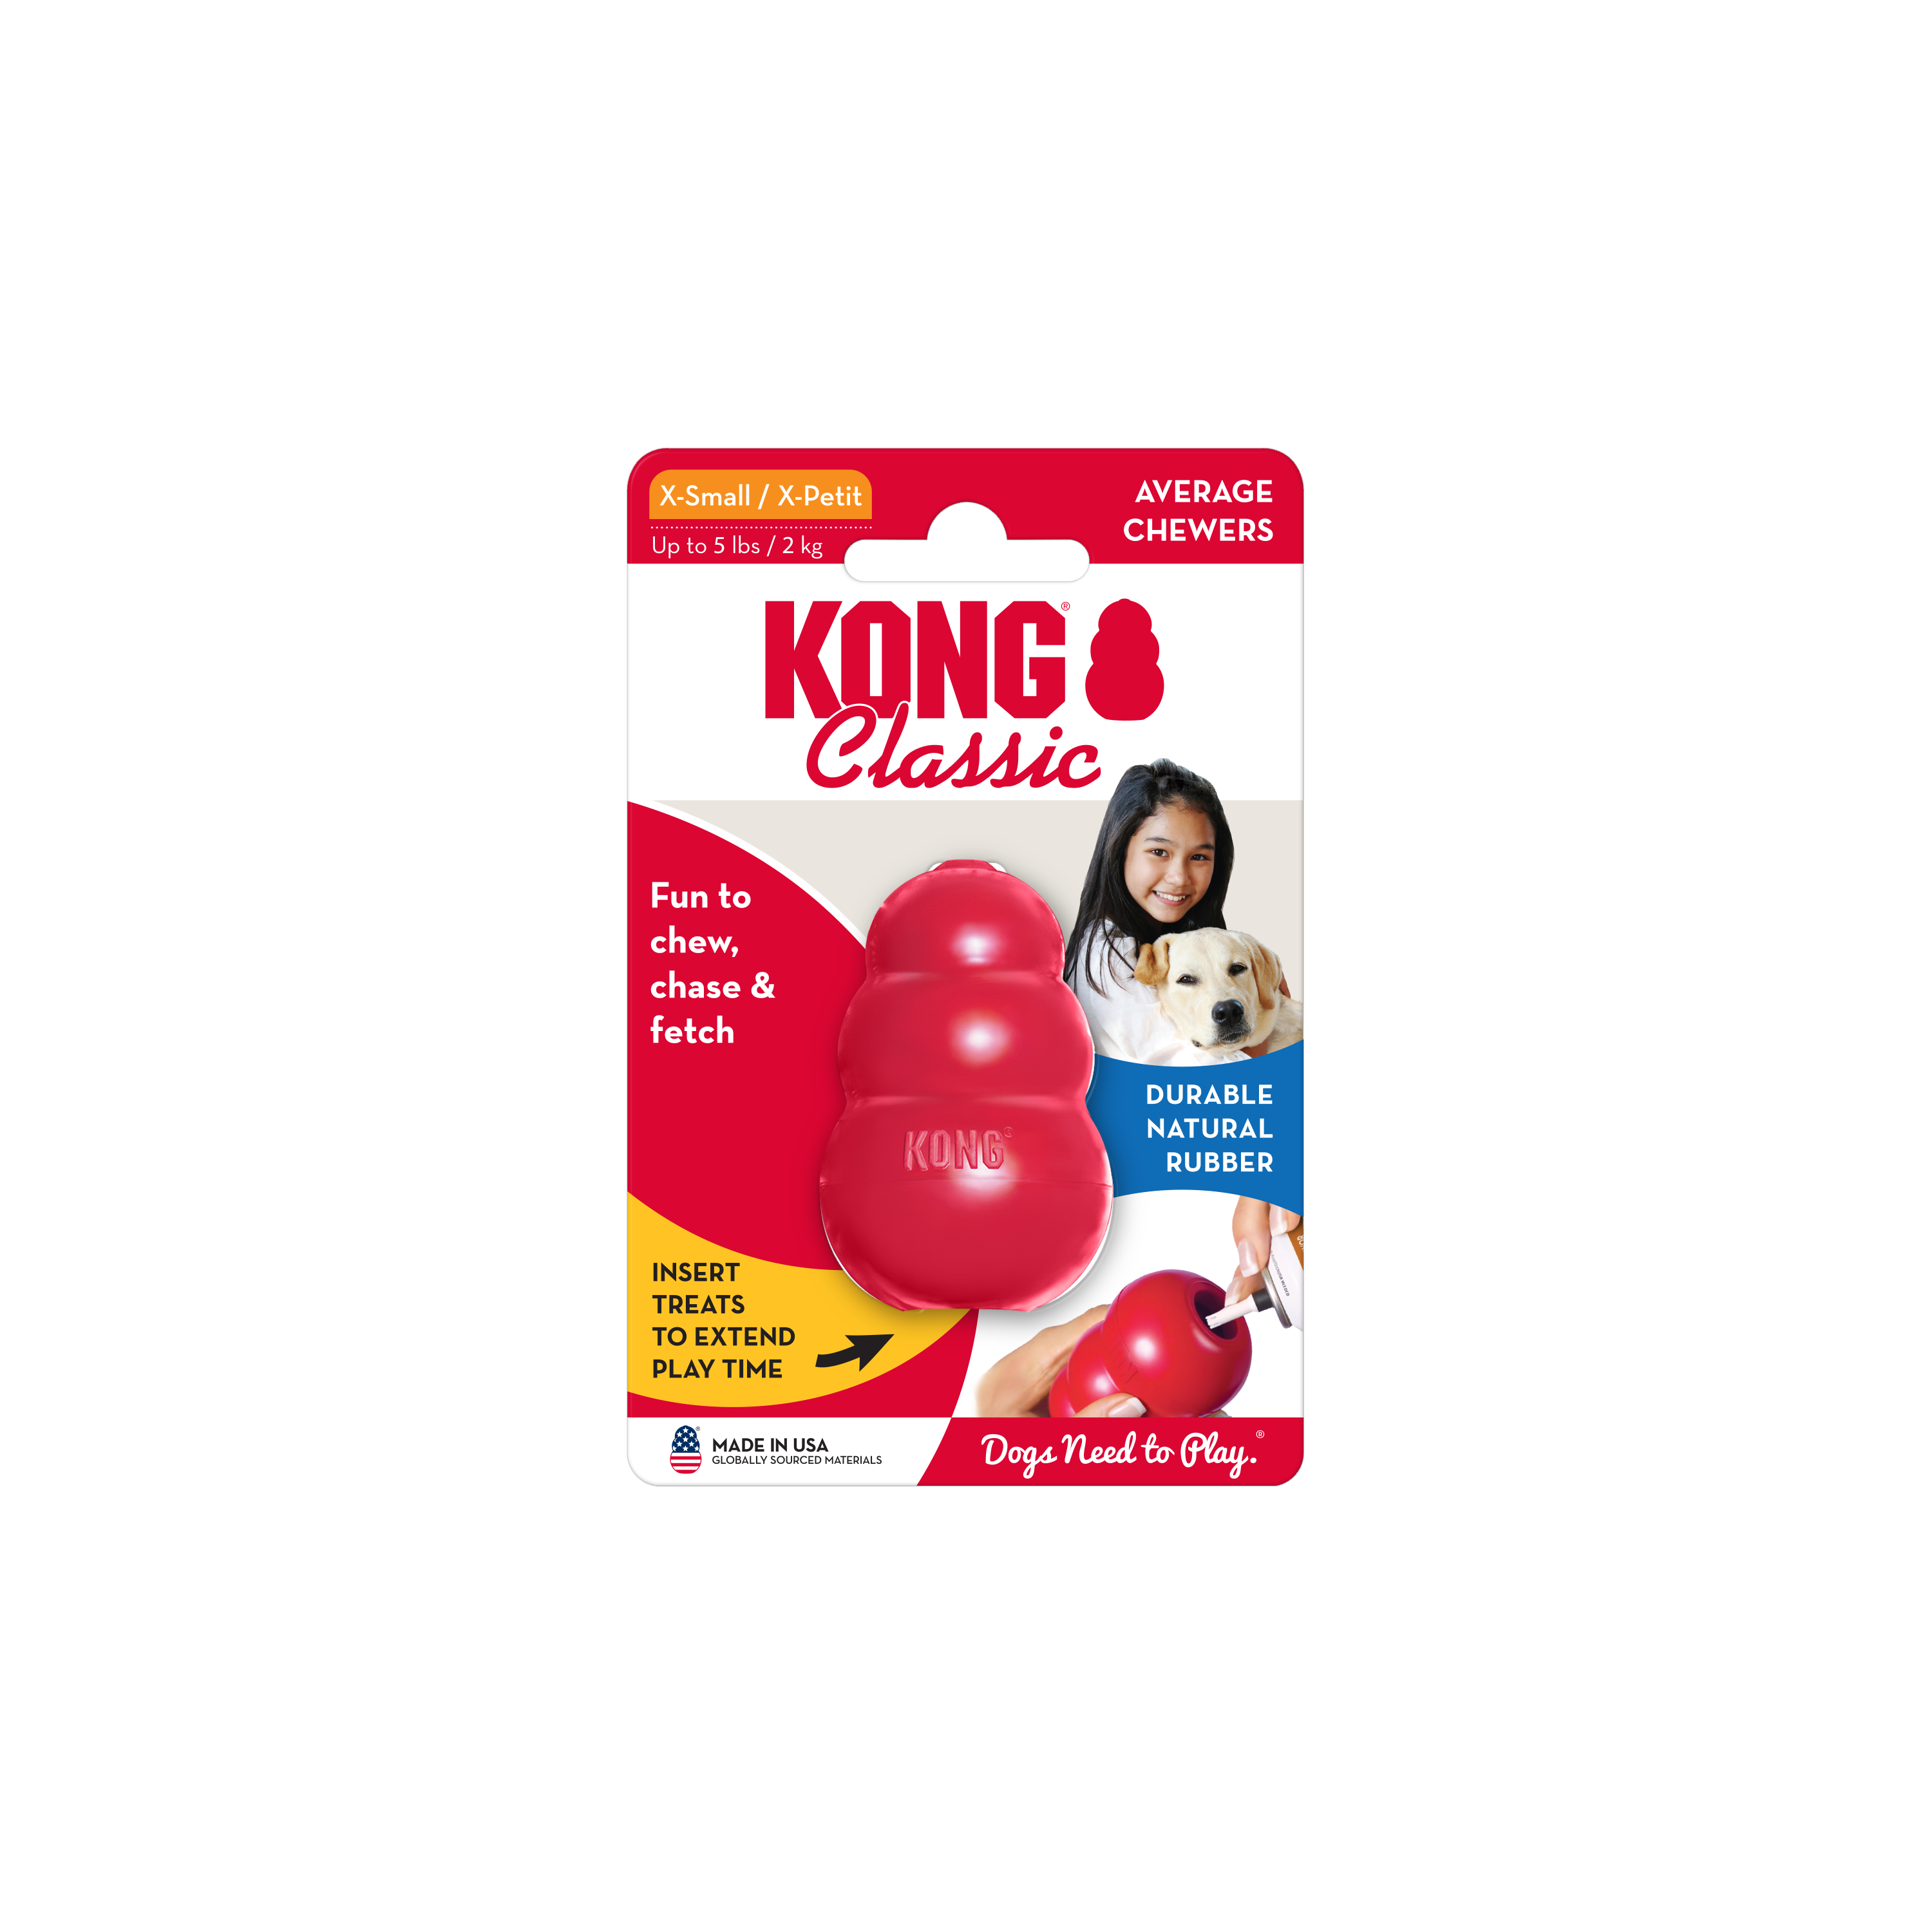 KONG Classic onpack product image